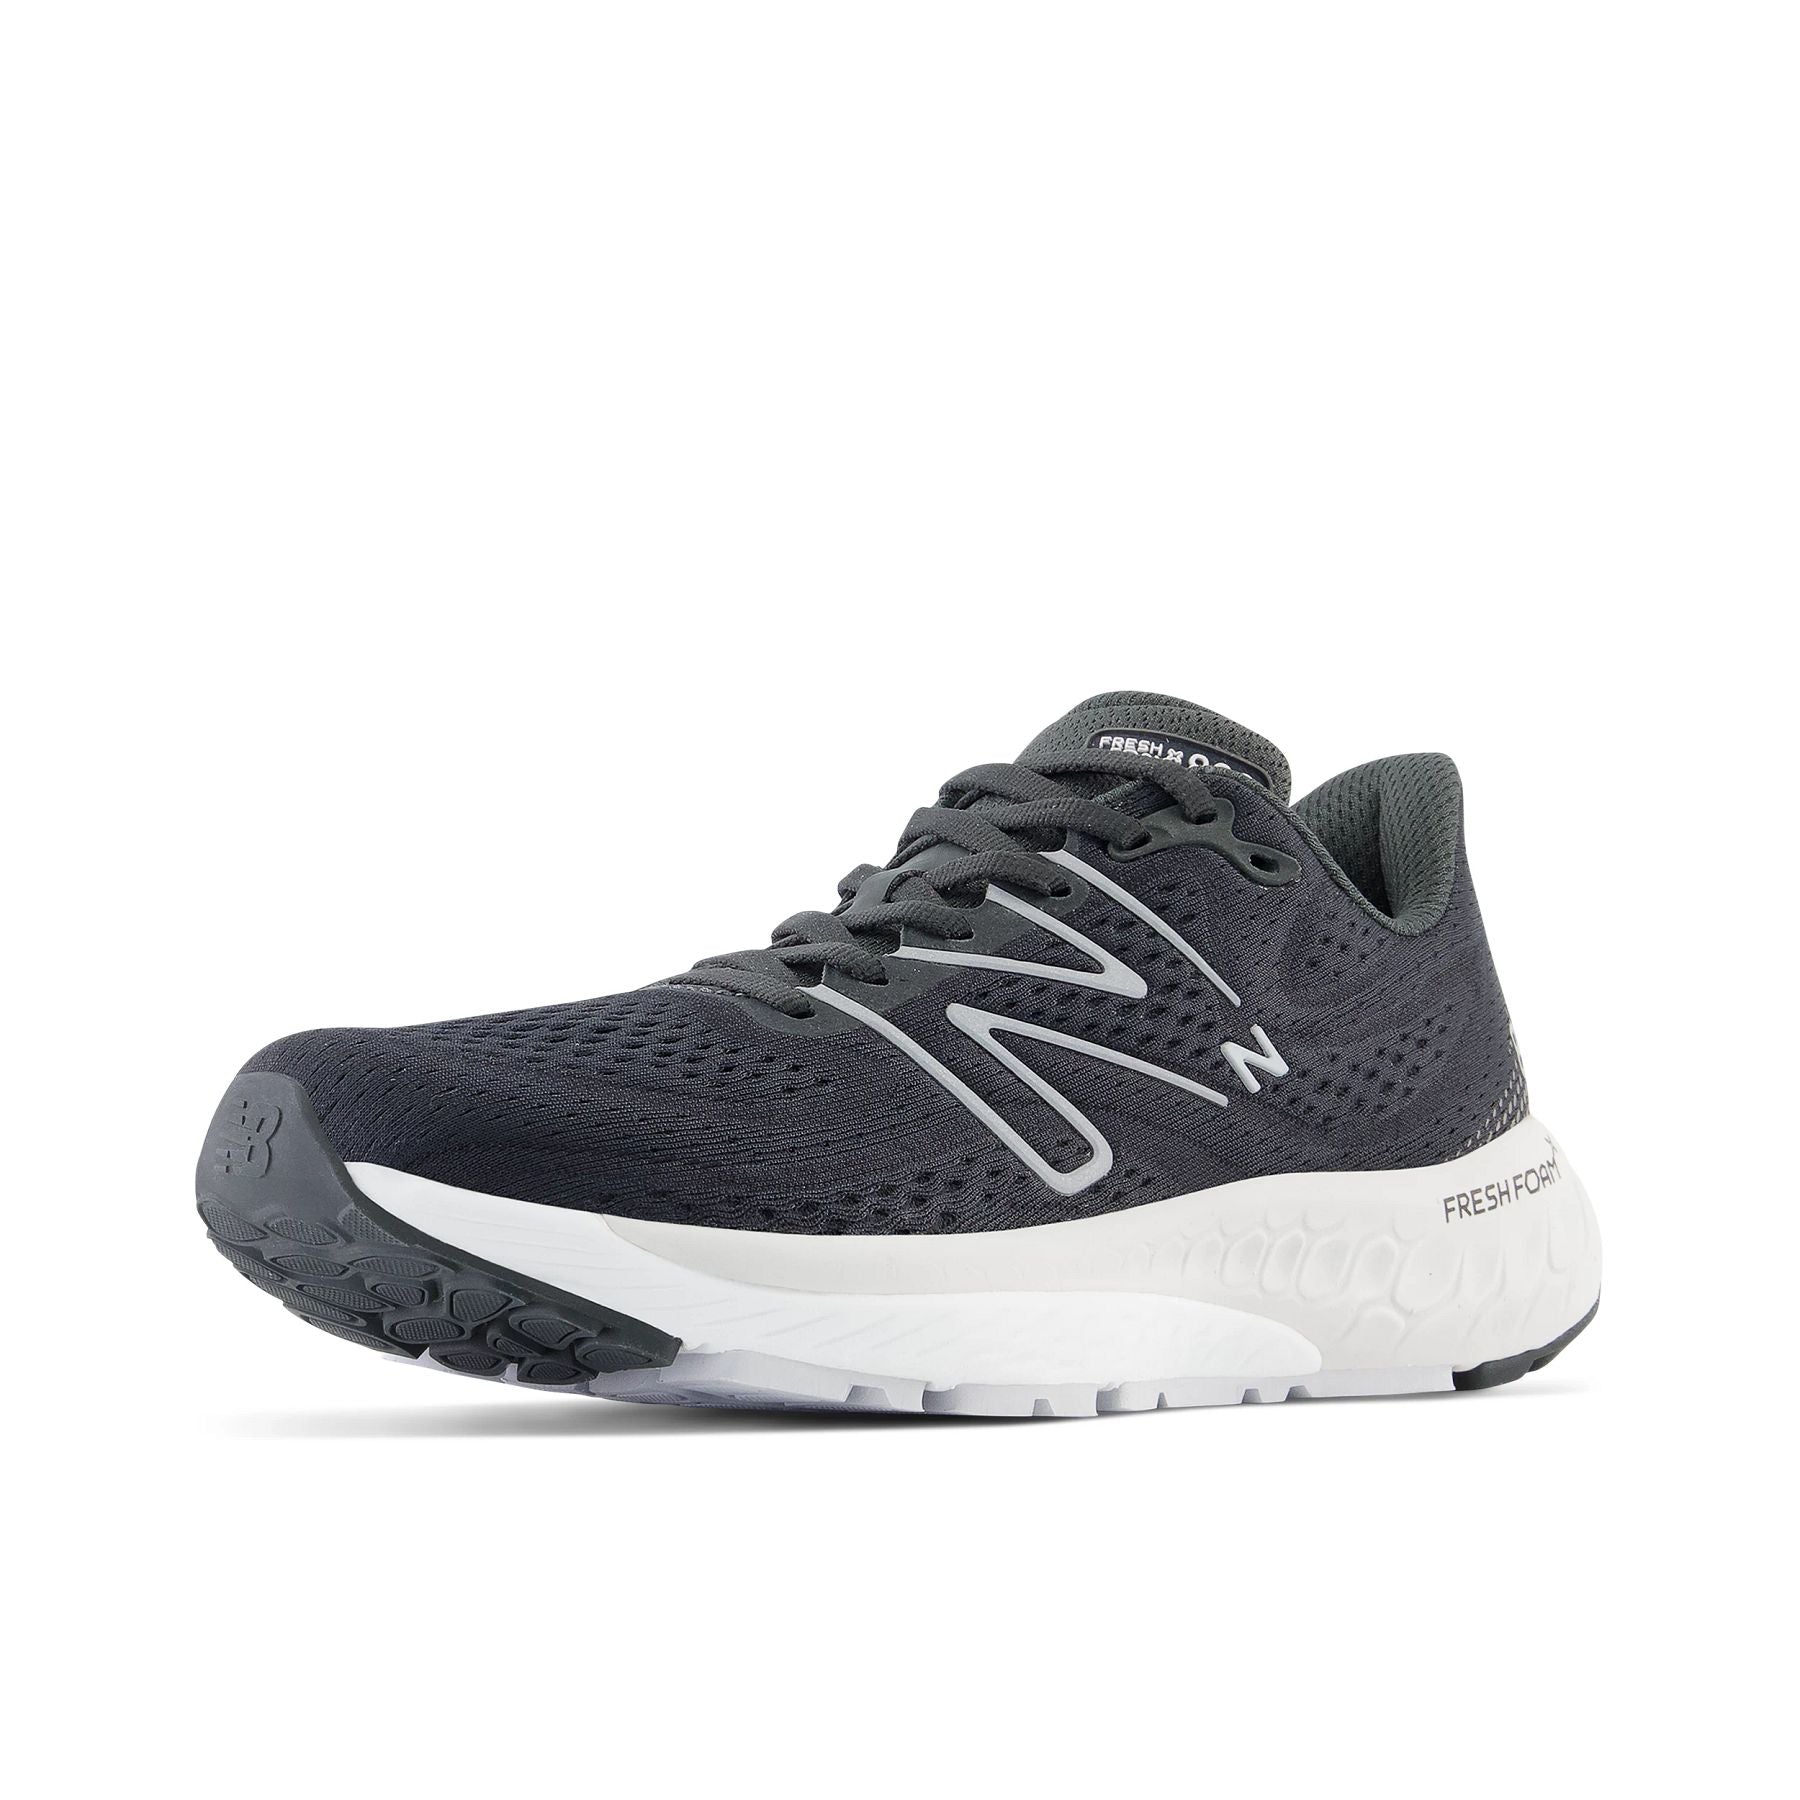 Front angle view of the Women's 880 V13 by New Balance in the color Black / Silver